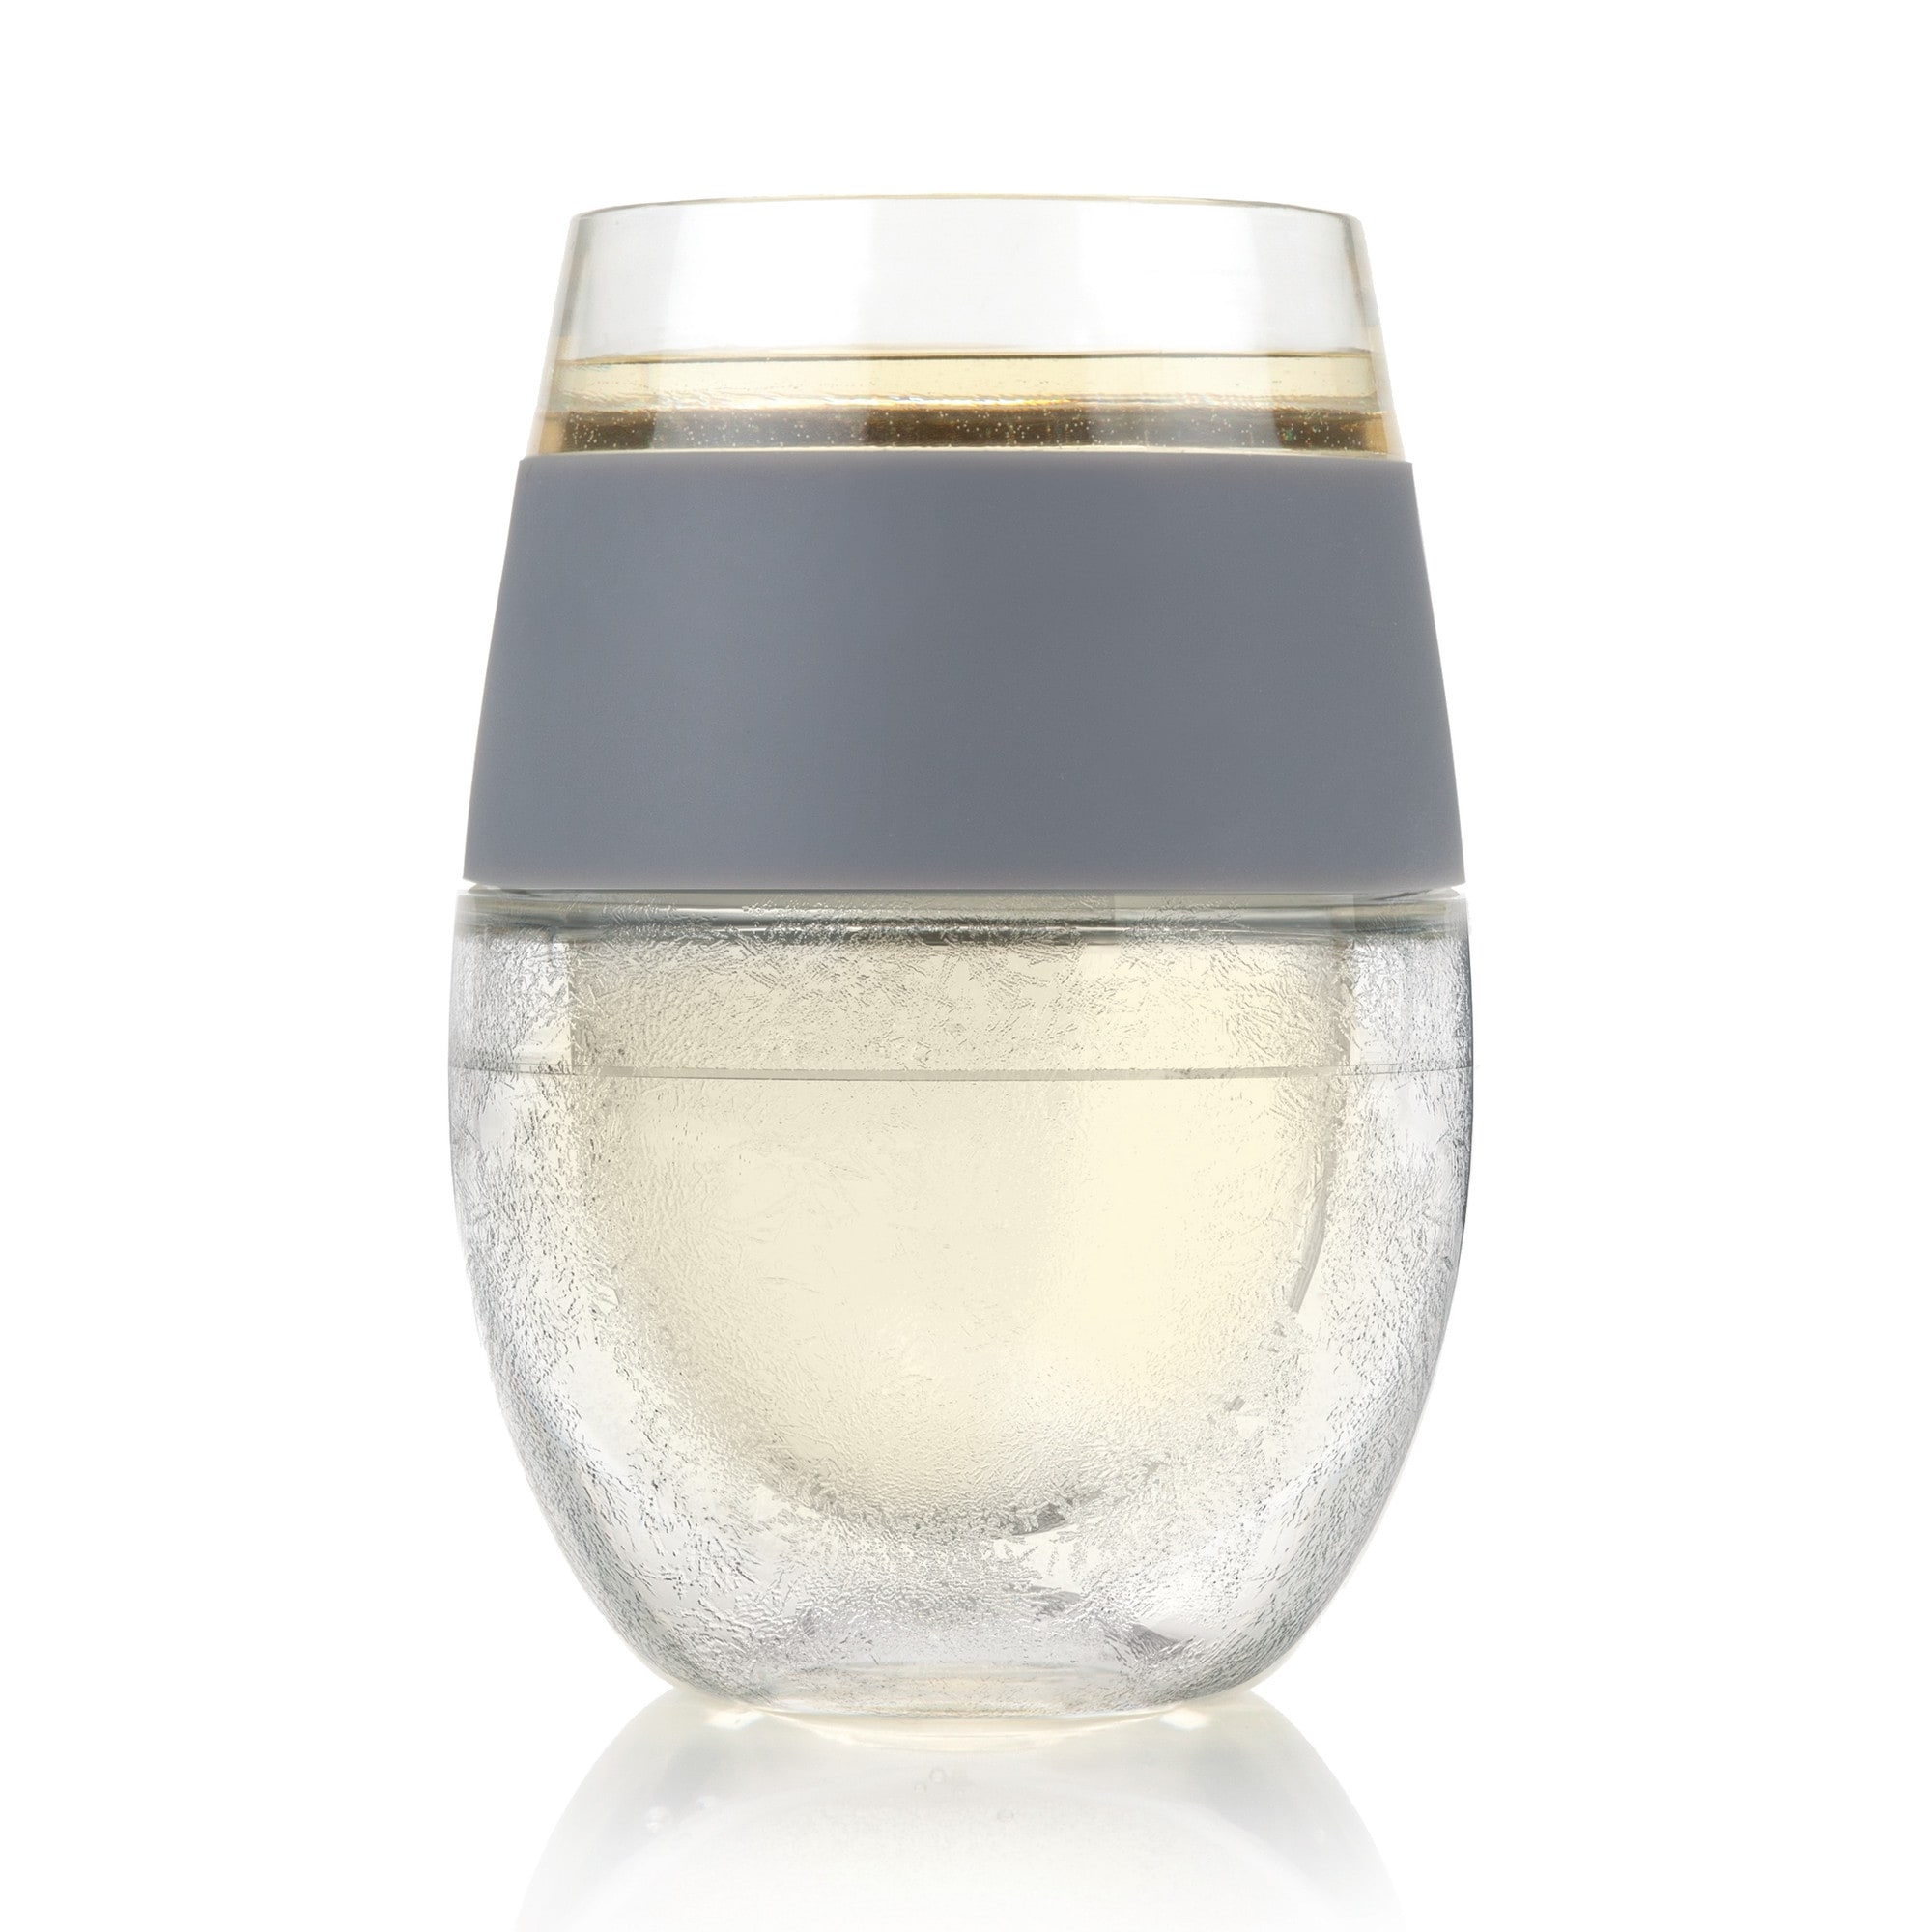 https://ak1.ostkcdn.com/images/products/is/images/direct/f928cabe0ca15576b09ae1756e2fa9eeee38c94b/Wine-FREEZE-Cooling-Cup-in-Grey-%281-pack%29-by-HOST.jpg